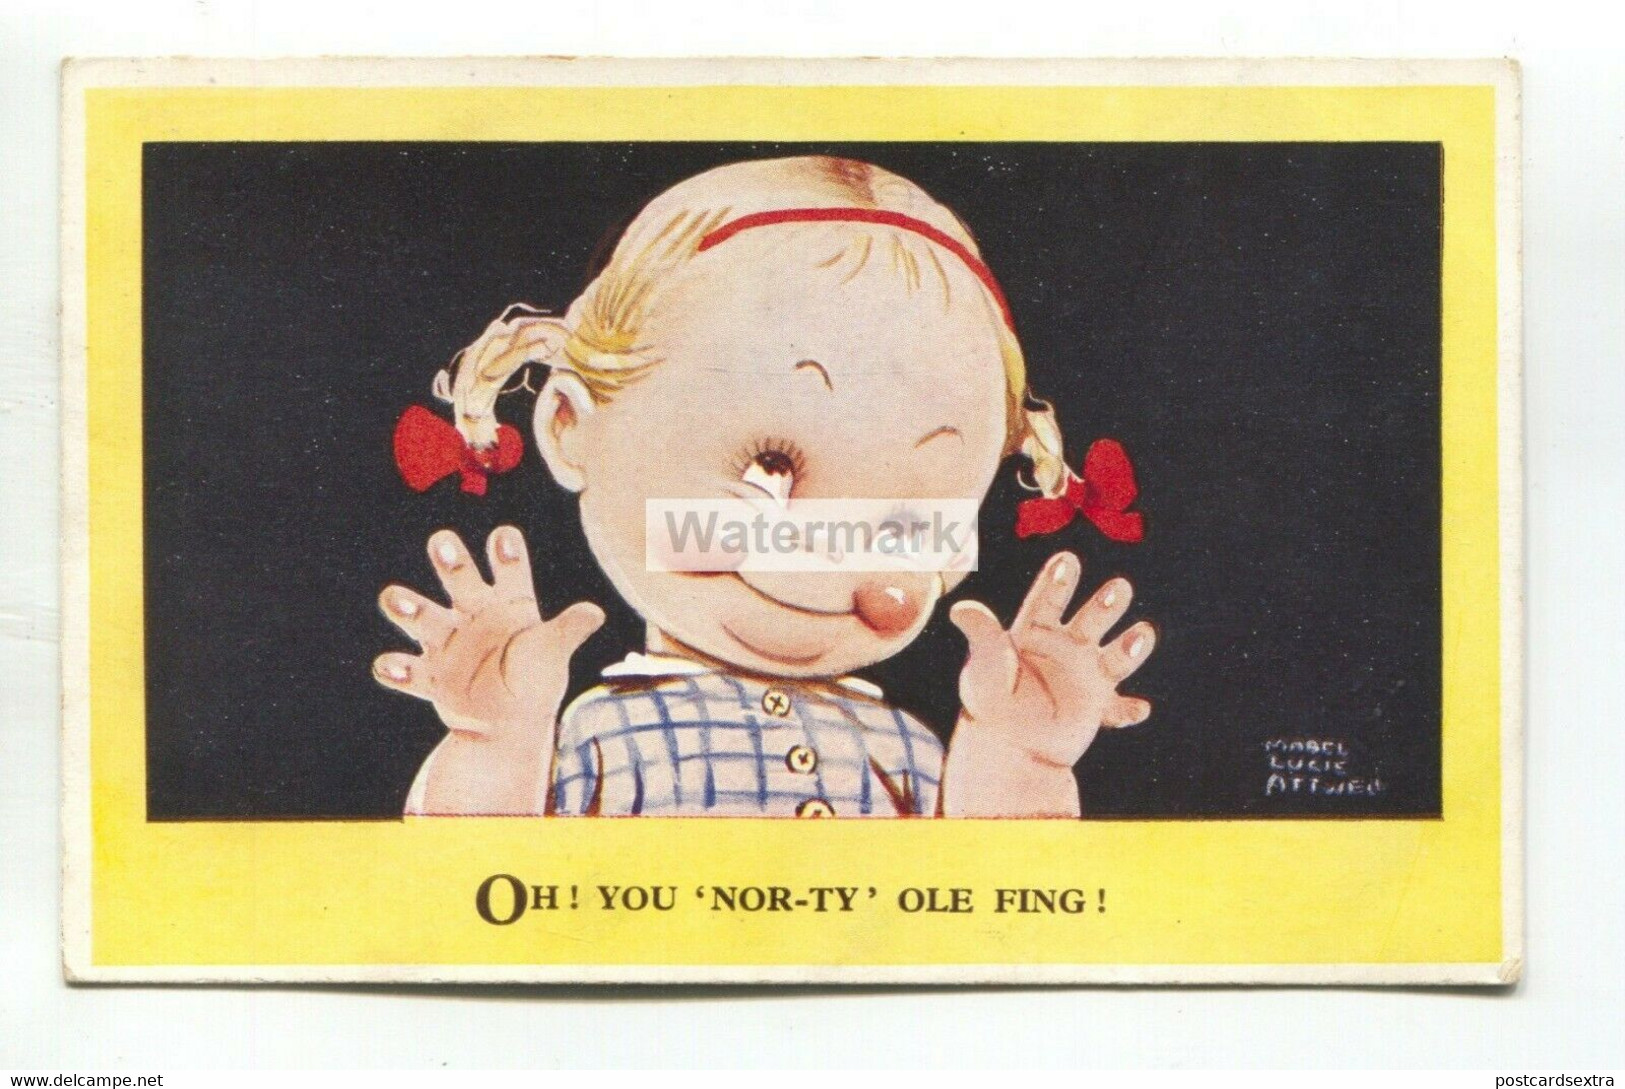 Mabel Lucie Attwell Postcard No. 2922 - Oh! You "nor-ty" Ole Fing! - C1930's - Attwell, M. L.